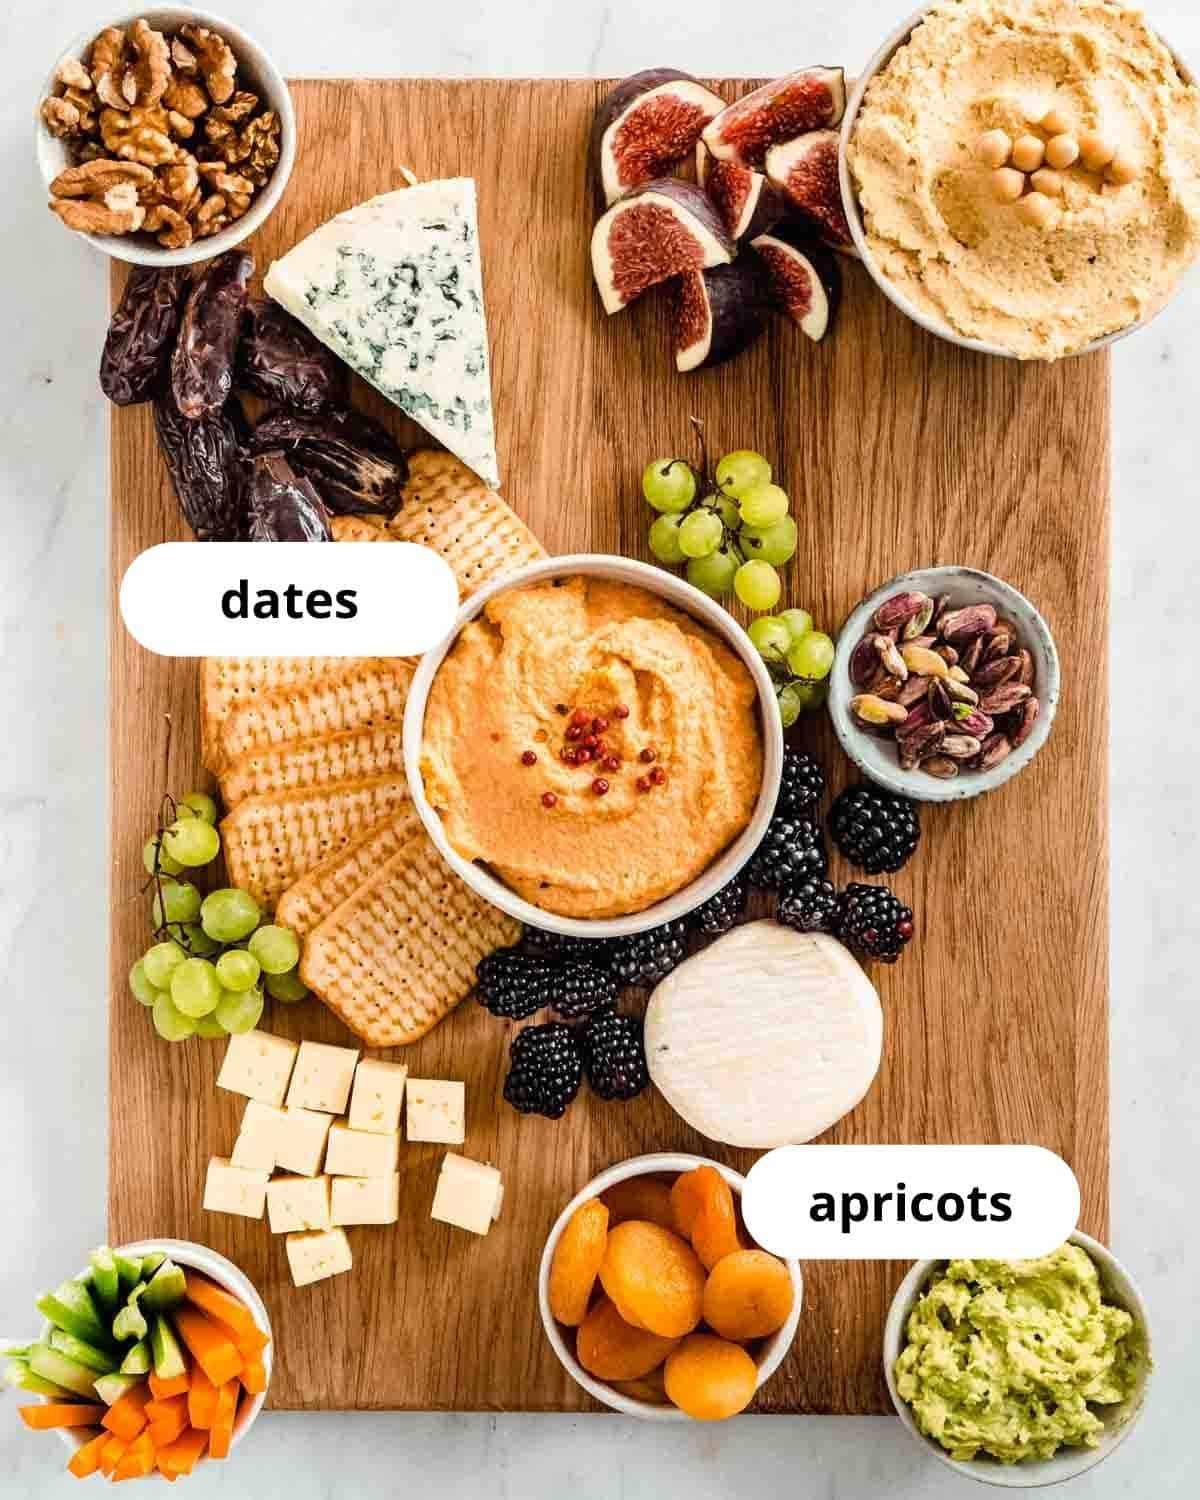 cutting board with hummus, a spicy spread, guacamole, and 3 types of cheese, crackers, walnuts, pistachios, carrot and celery sticks, fresh figs, grapes, berries, dates and apricots on it.